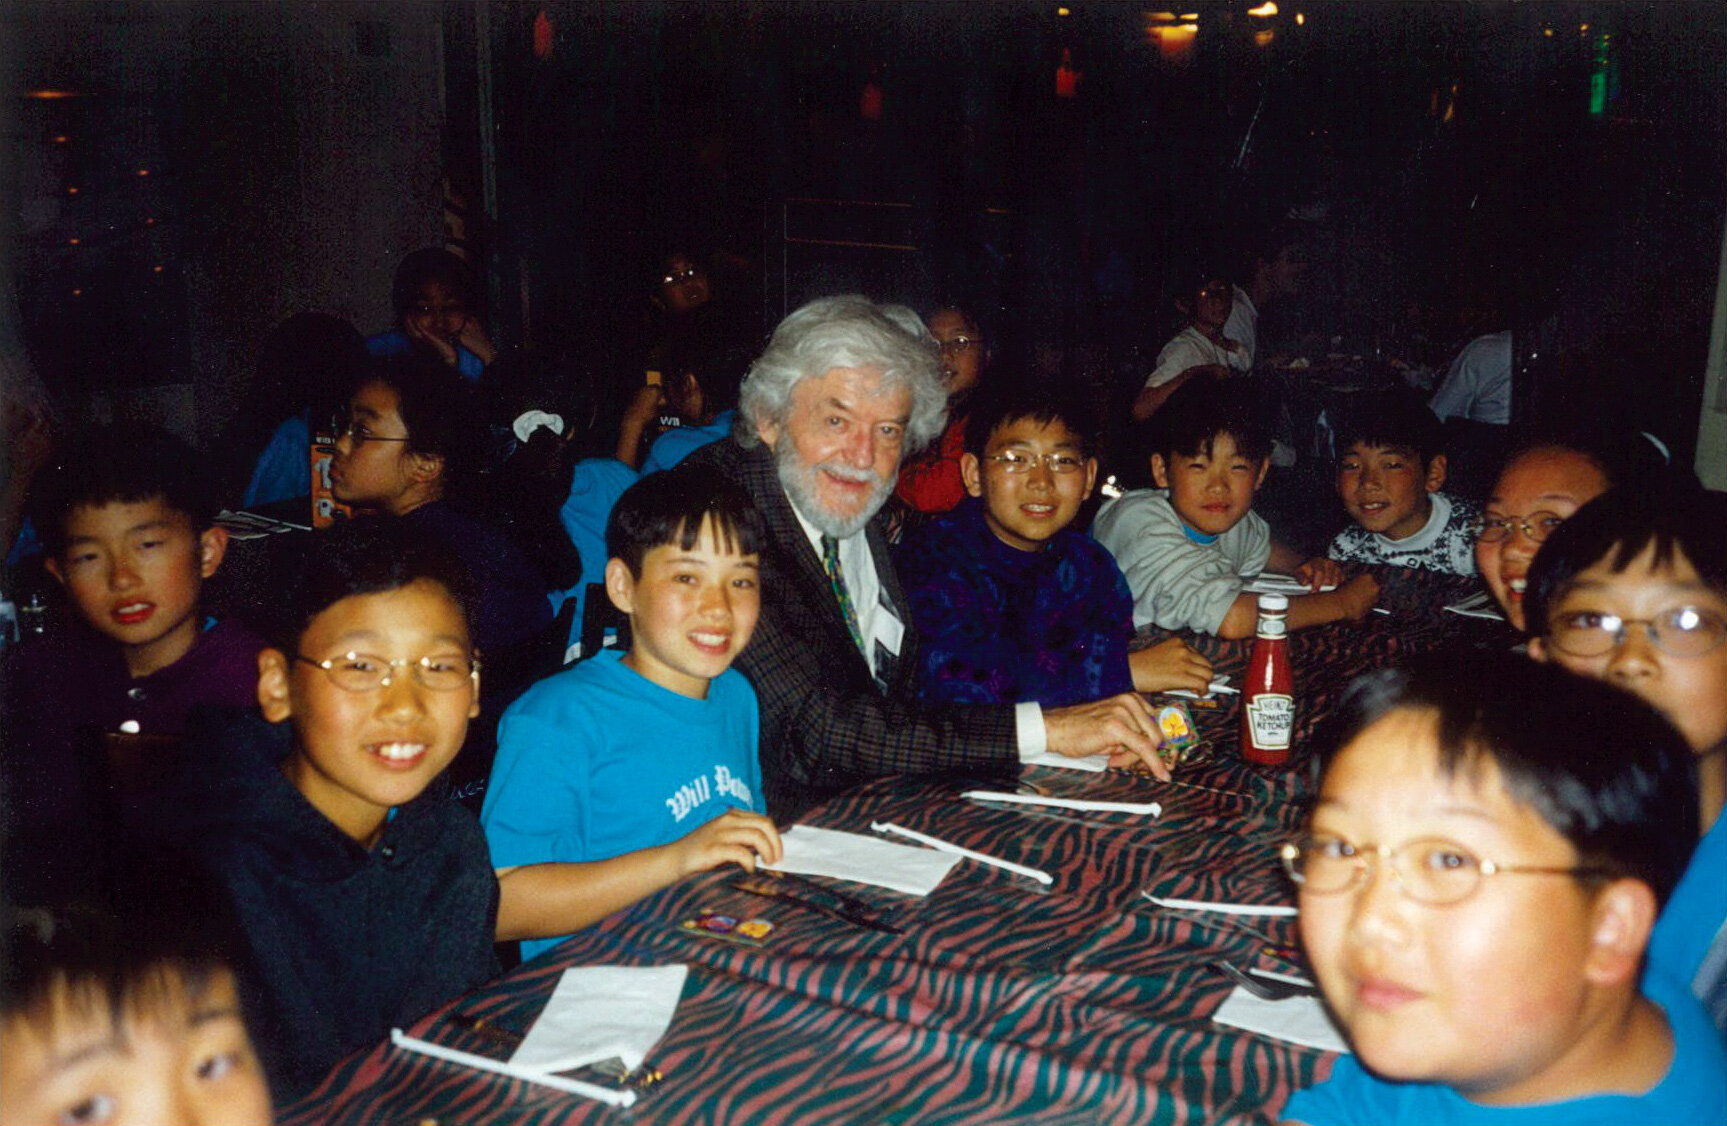  With Hal Holbrook, after performance at the National Press Club in Washington, D.C. 